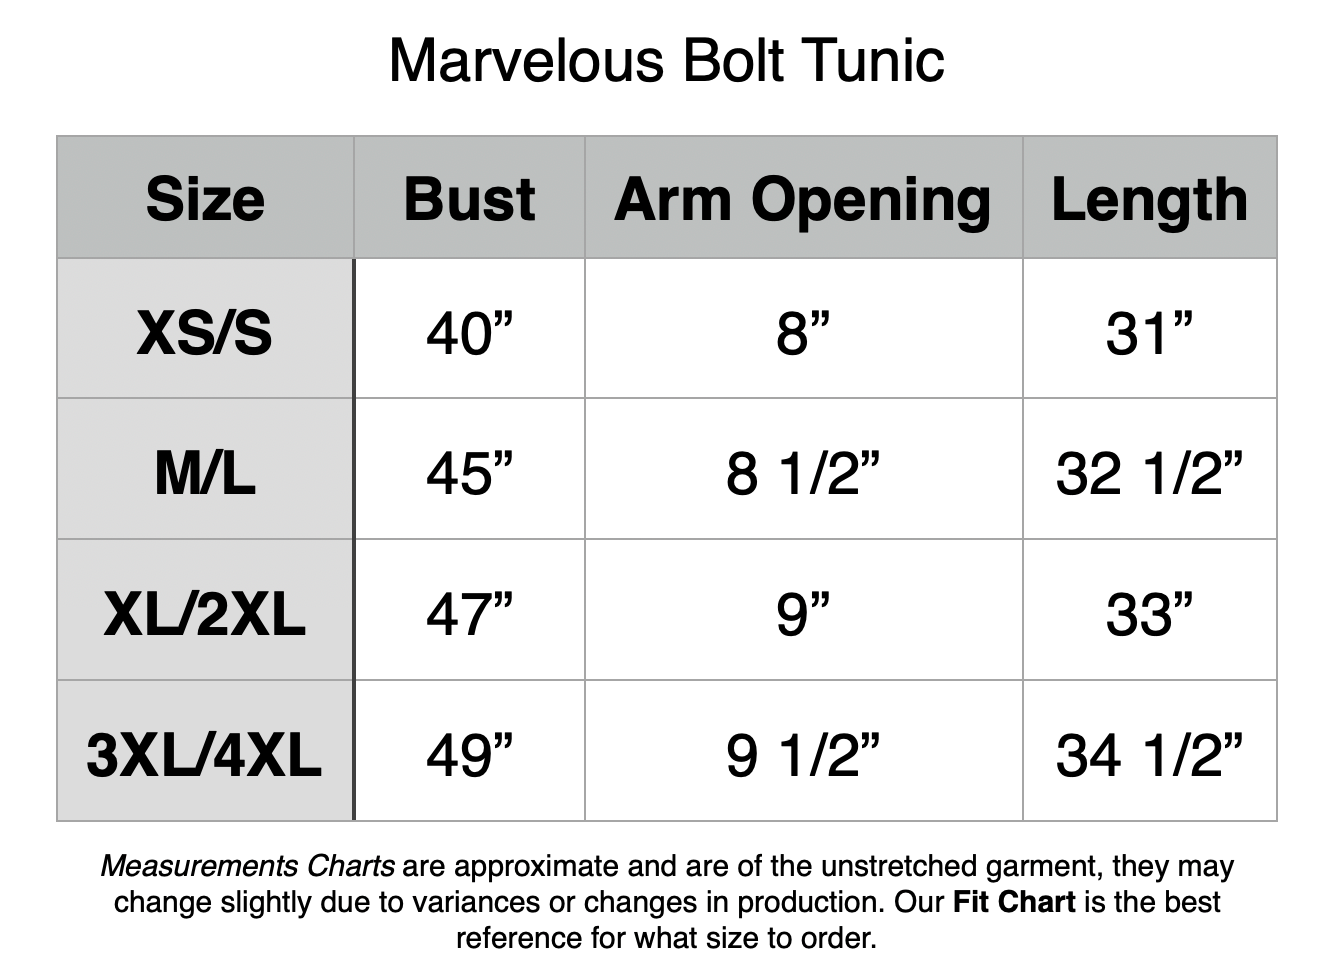 Marvelous Bolt Tunic: XS/S - 40” Bust, 8” Arm Opening, 31” Length. M/L - 45” Bust, 8.5” Arm Opening, 32.5” Length. XL/2XL - 47” Bust, 9” Arm Opening, 33” Length. 3XL/4XL - 49” Bust, 9.5” Bust, 34.5” Length.